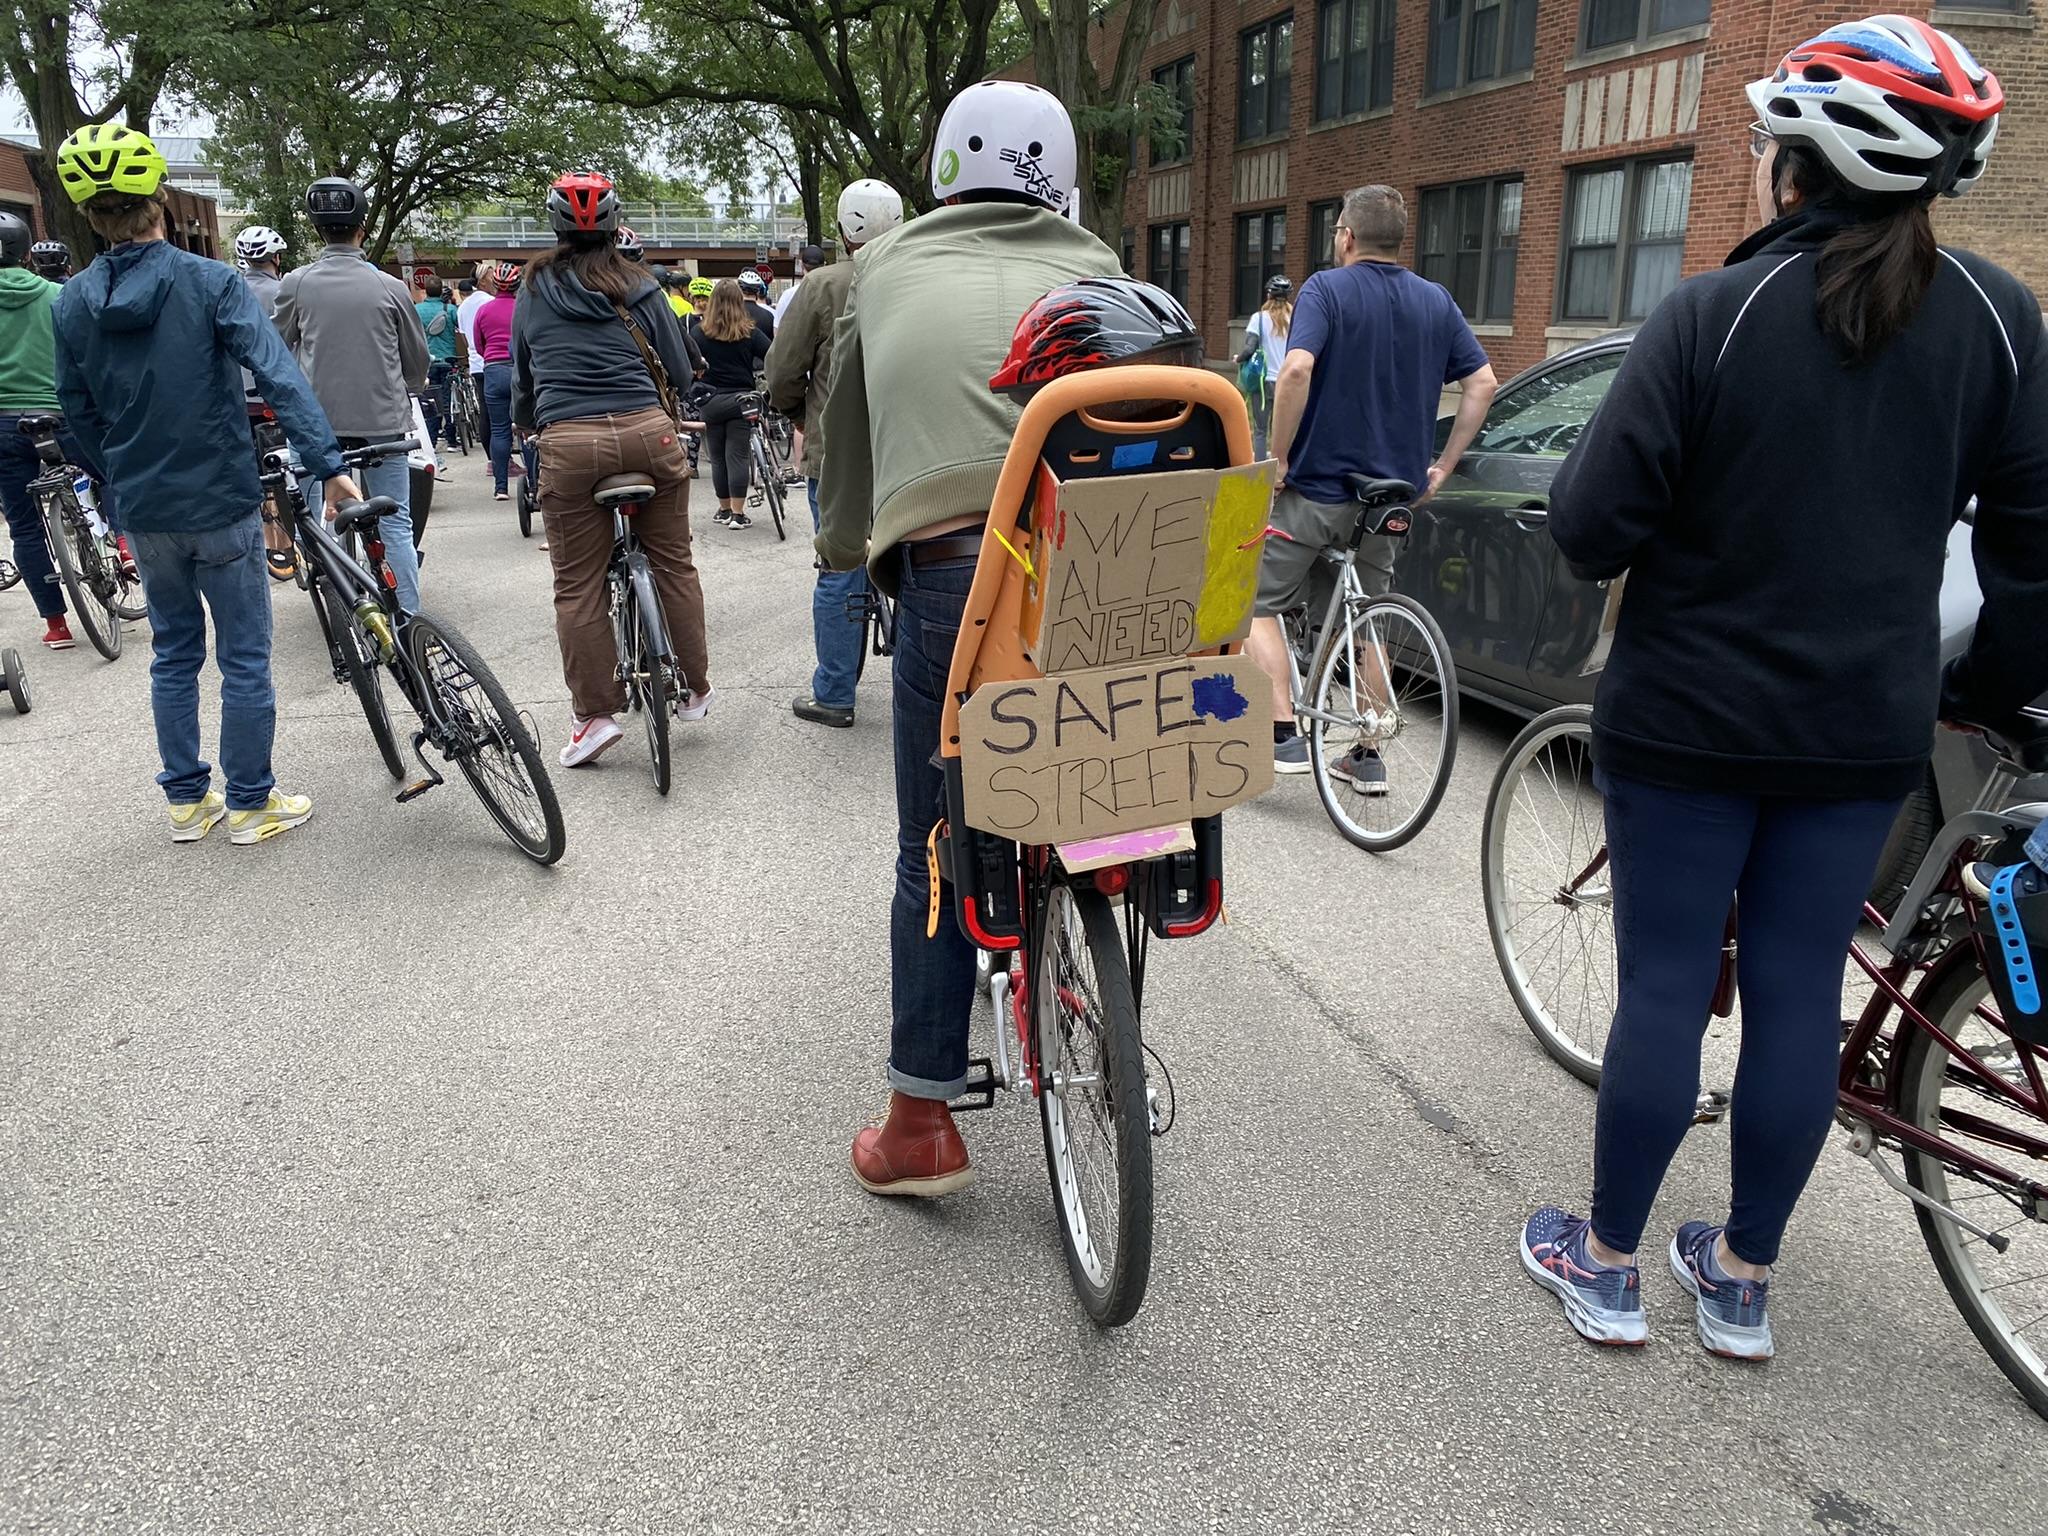 Attendees at a safe streets rally adorned their bikes with calls for change on June 12, 2022. (Nick Blumberg / WTTW News)